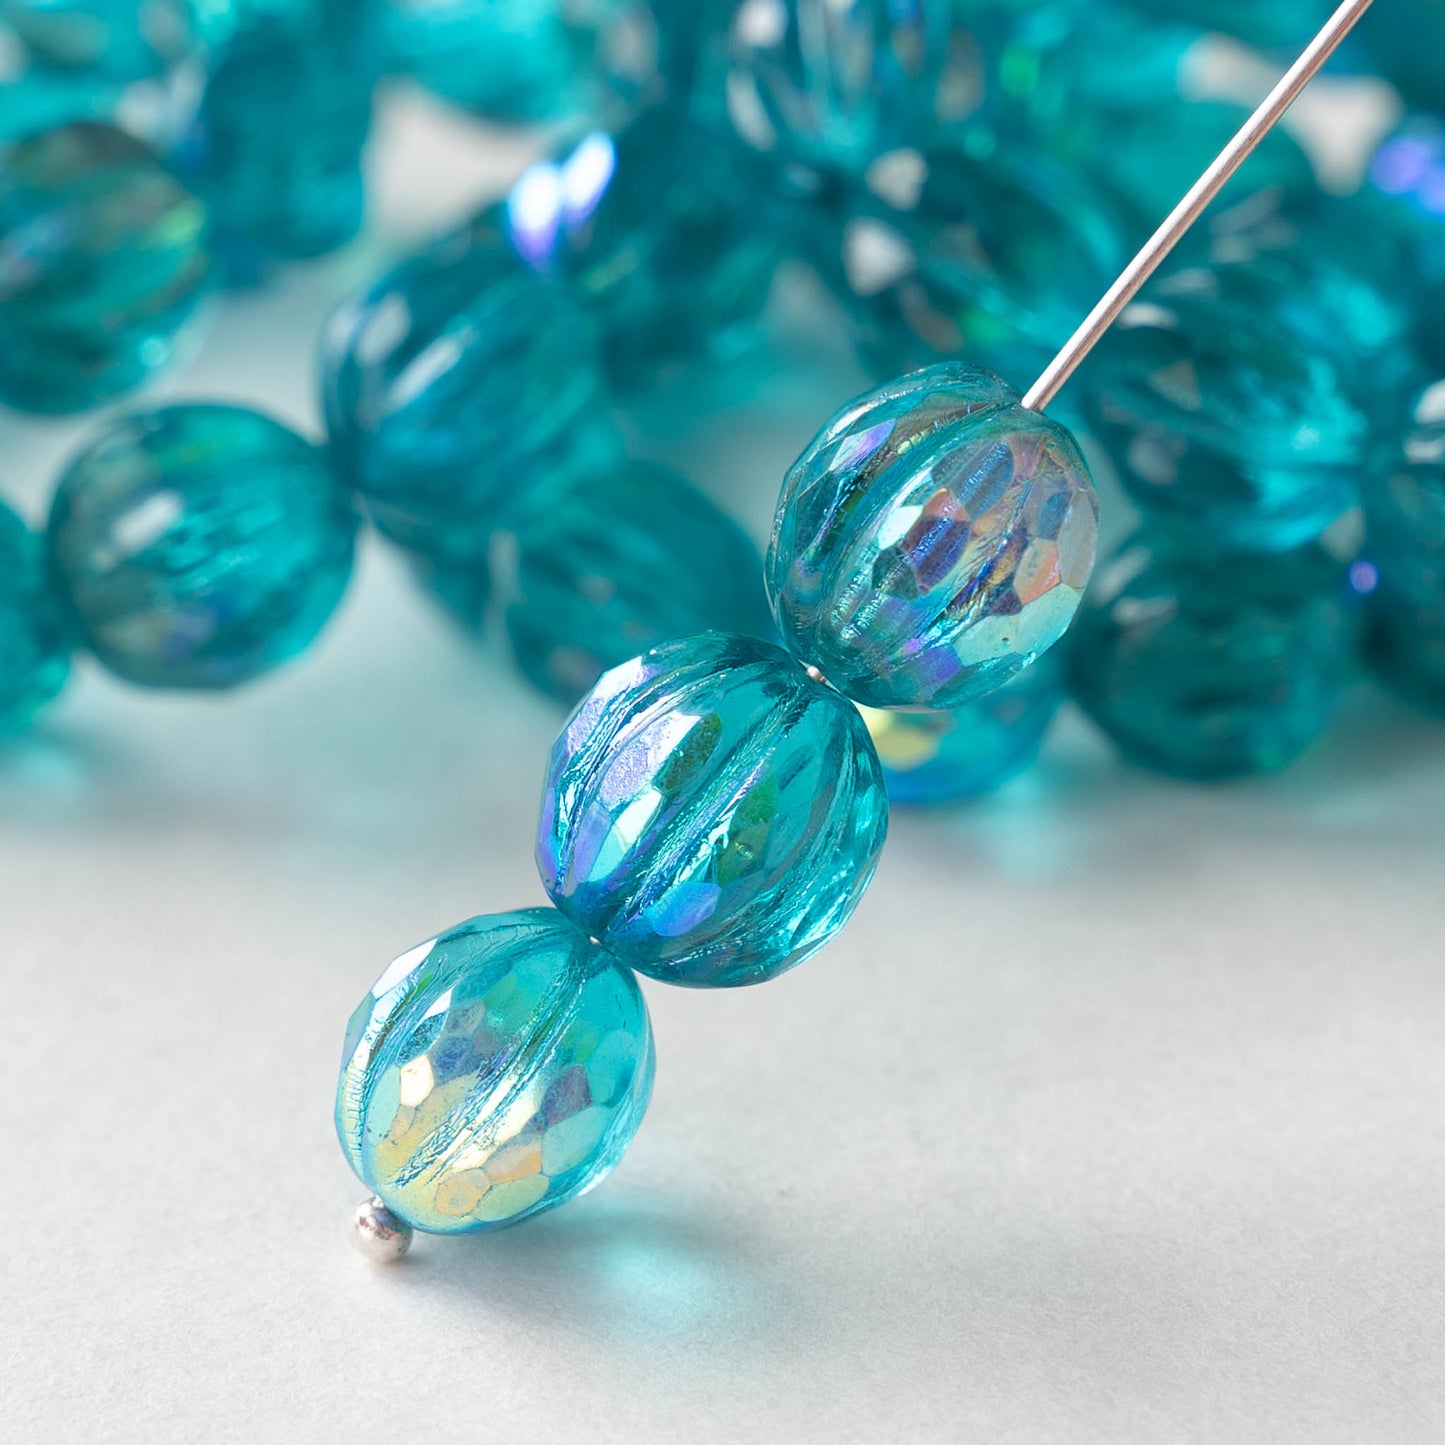 10mm Faceted Round Melon Beads - Teal with AB  - 12 beads